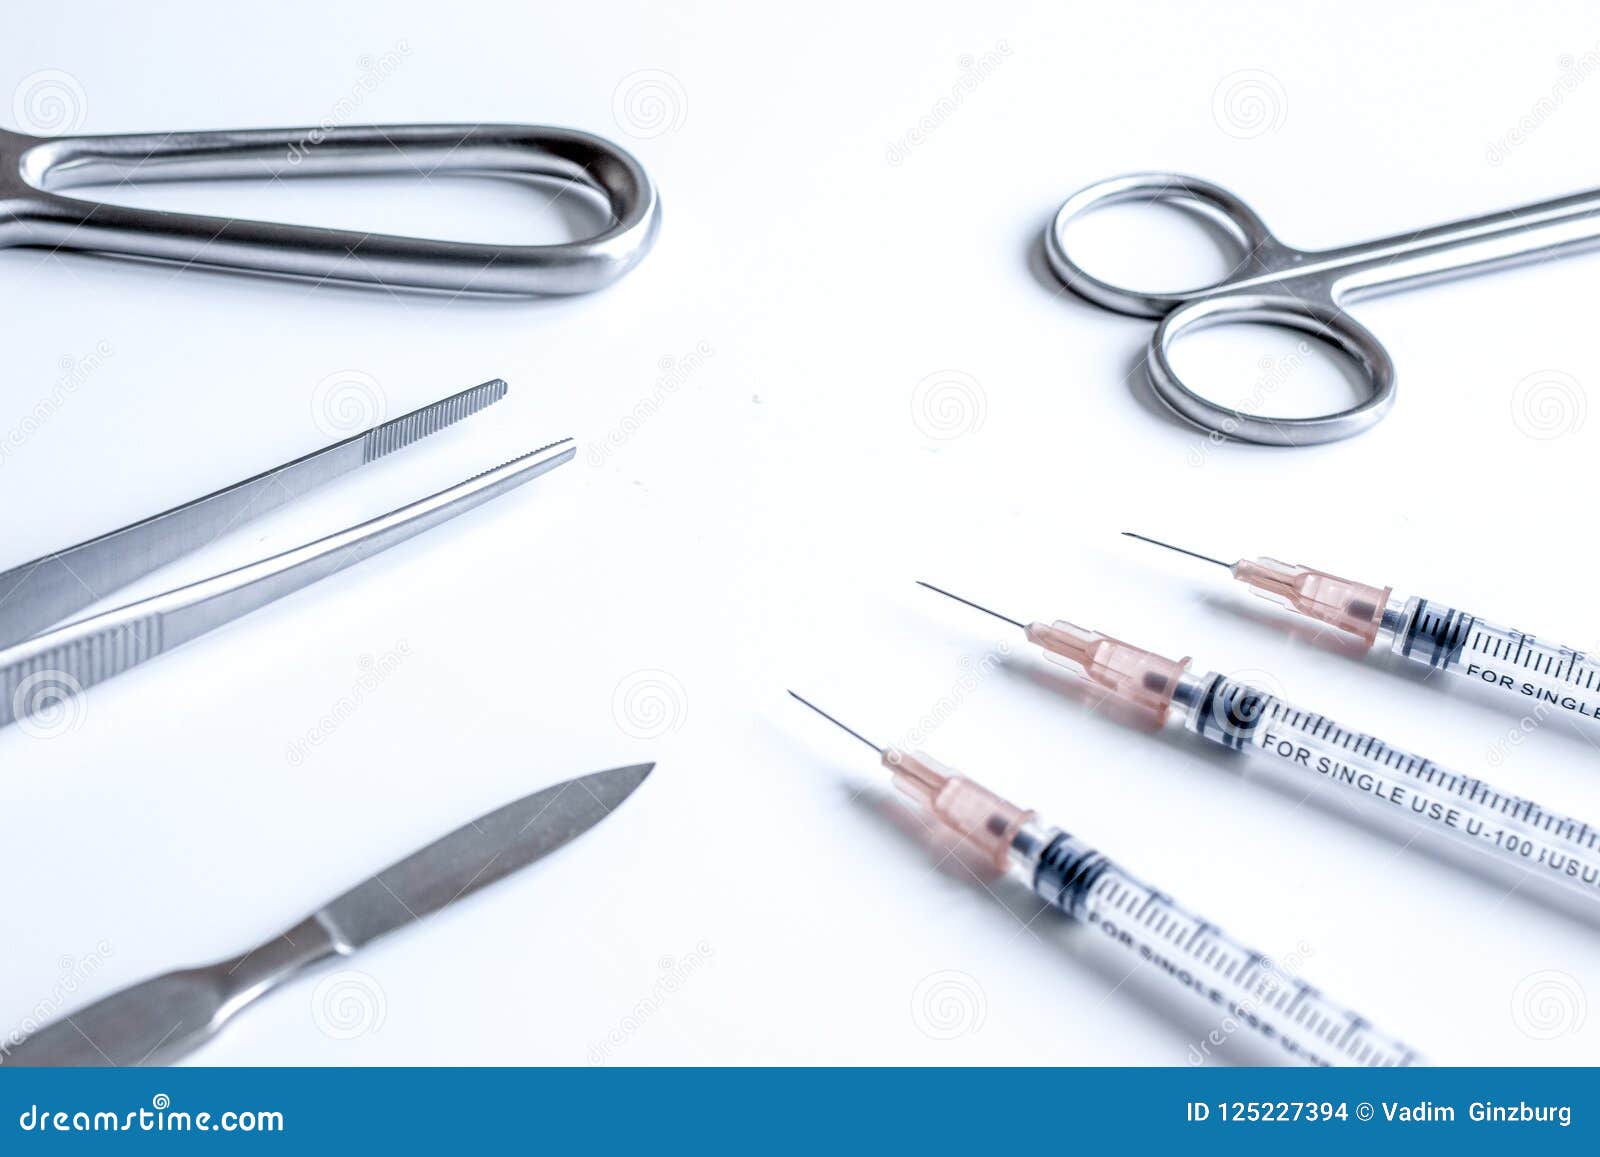 Cosmetic Surgery Supplies